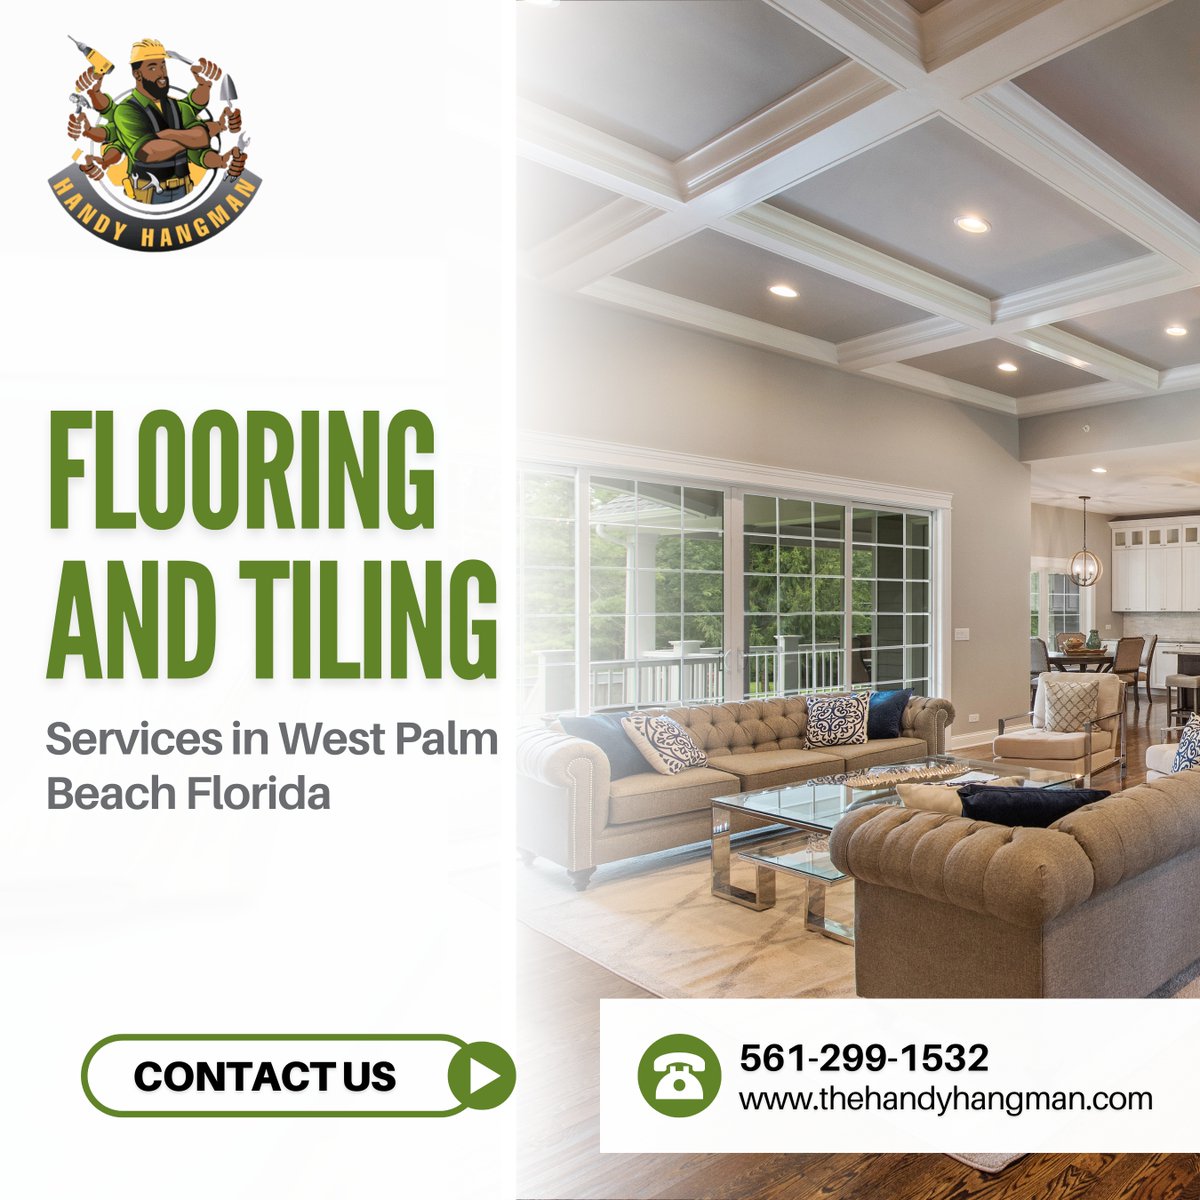 Revamp your home with top-notch flooring and tiling services in West Palm Beach, Florida! Discover more at thehandyhangman.com #WestPalmBeach #FlooringServices #TilingServices #HomeRenovation #InteriorDesign #FlooringIdeas #TileDesign #HomeImprovement #FloridaLiving #Home